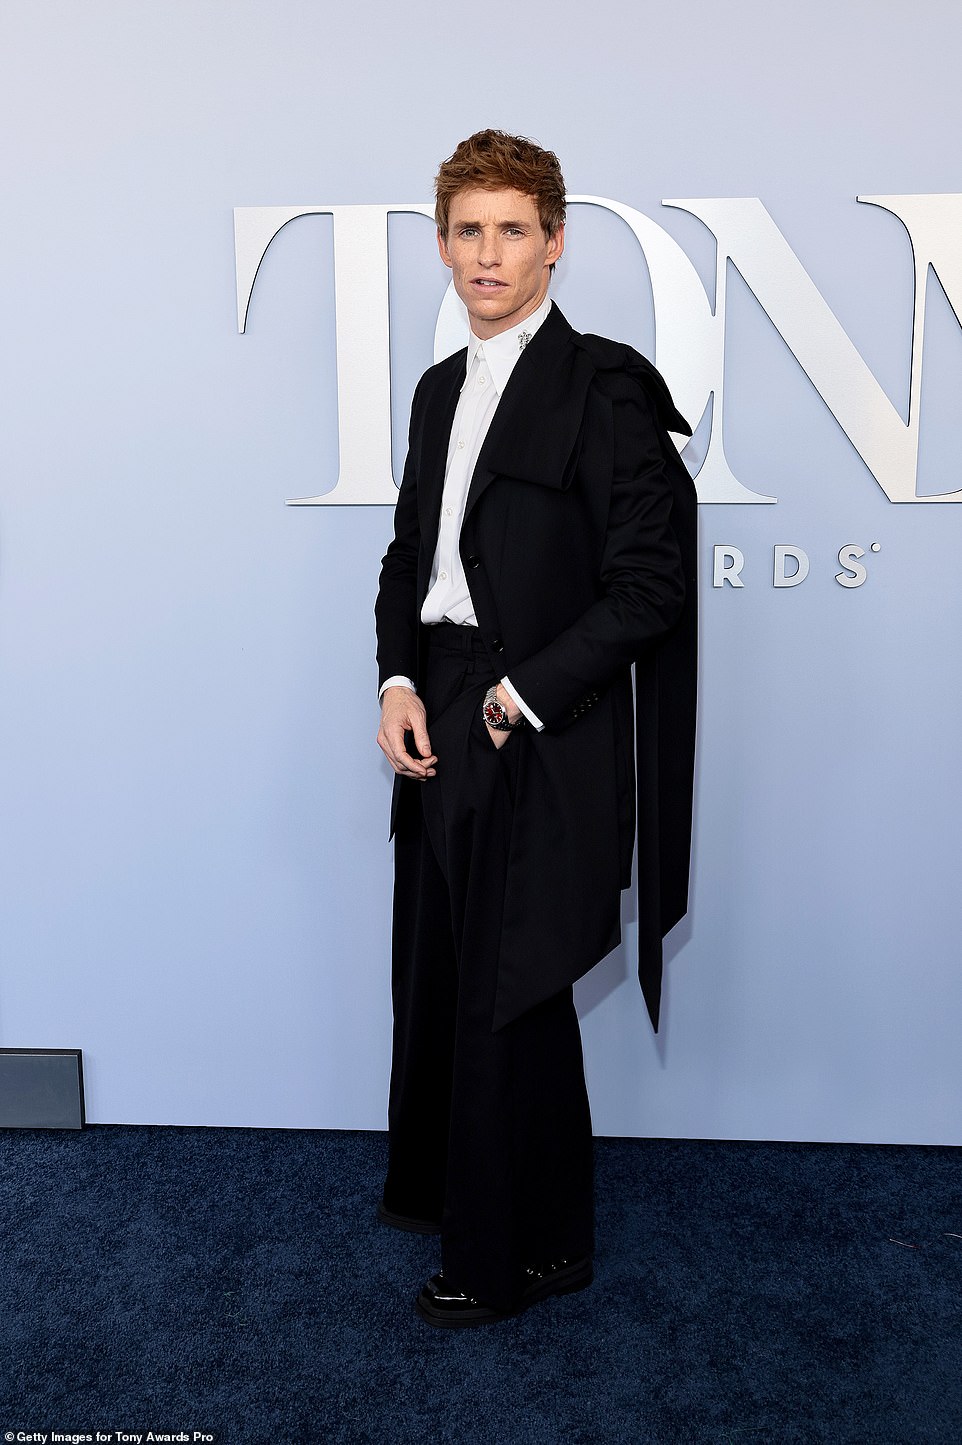 Eddie Redmayne chose a black and white look, complete with a cape